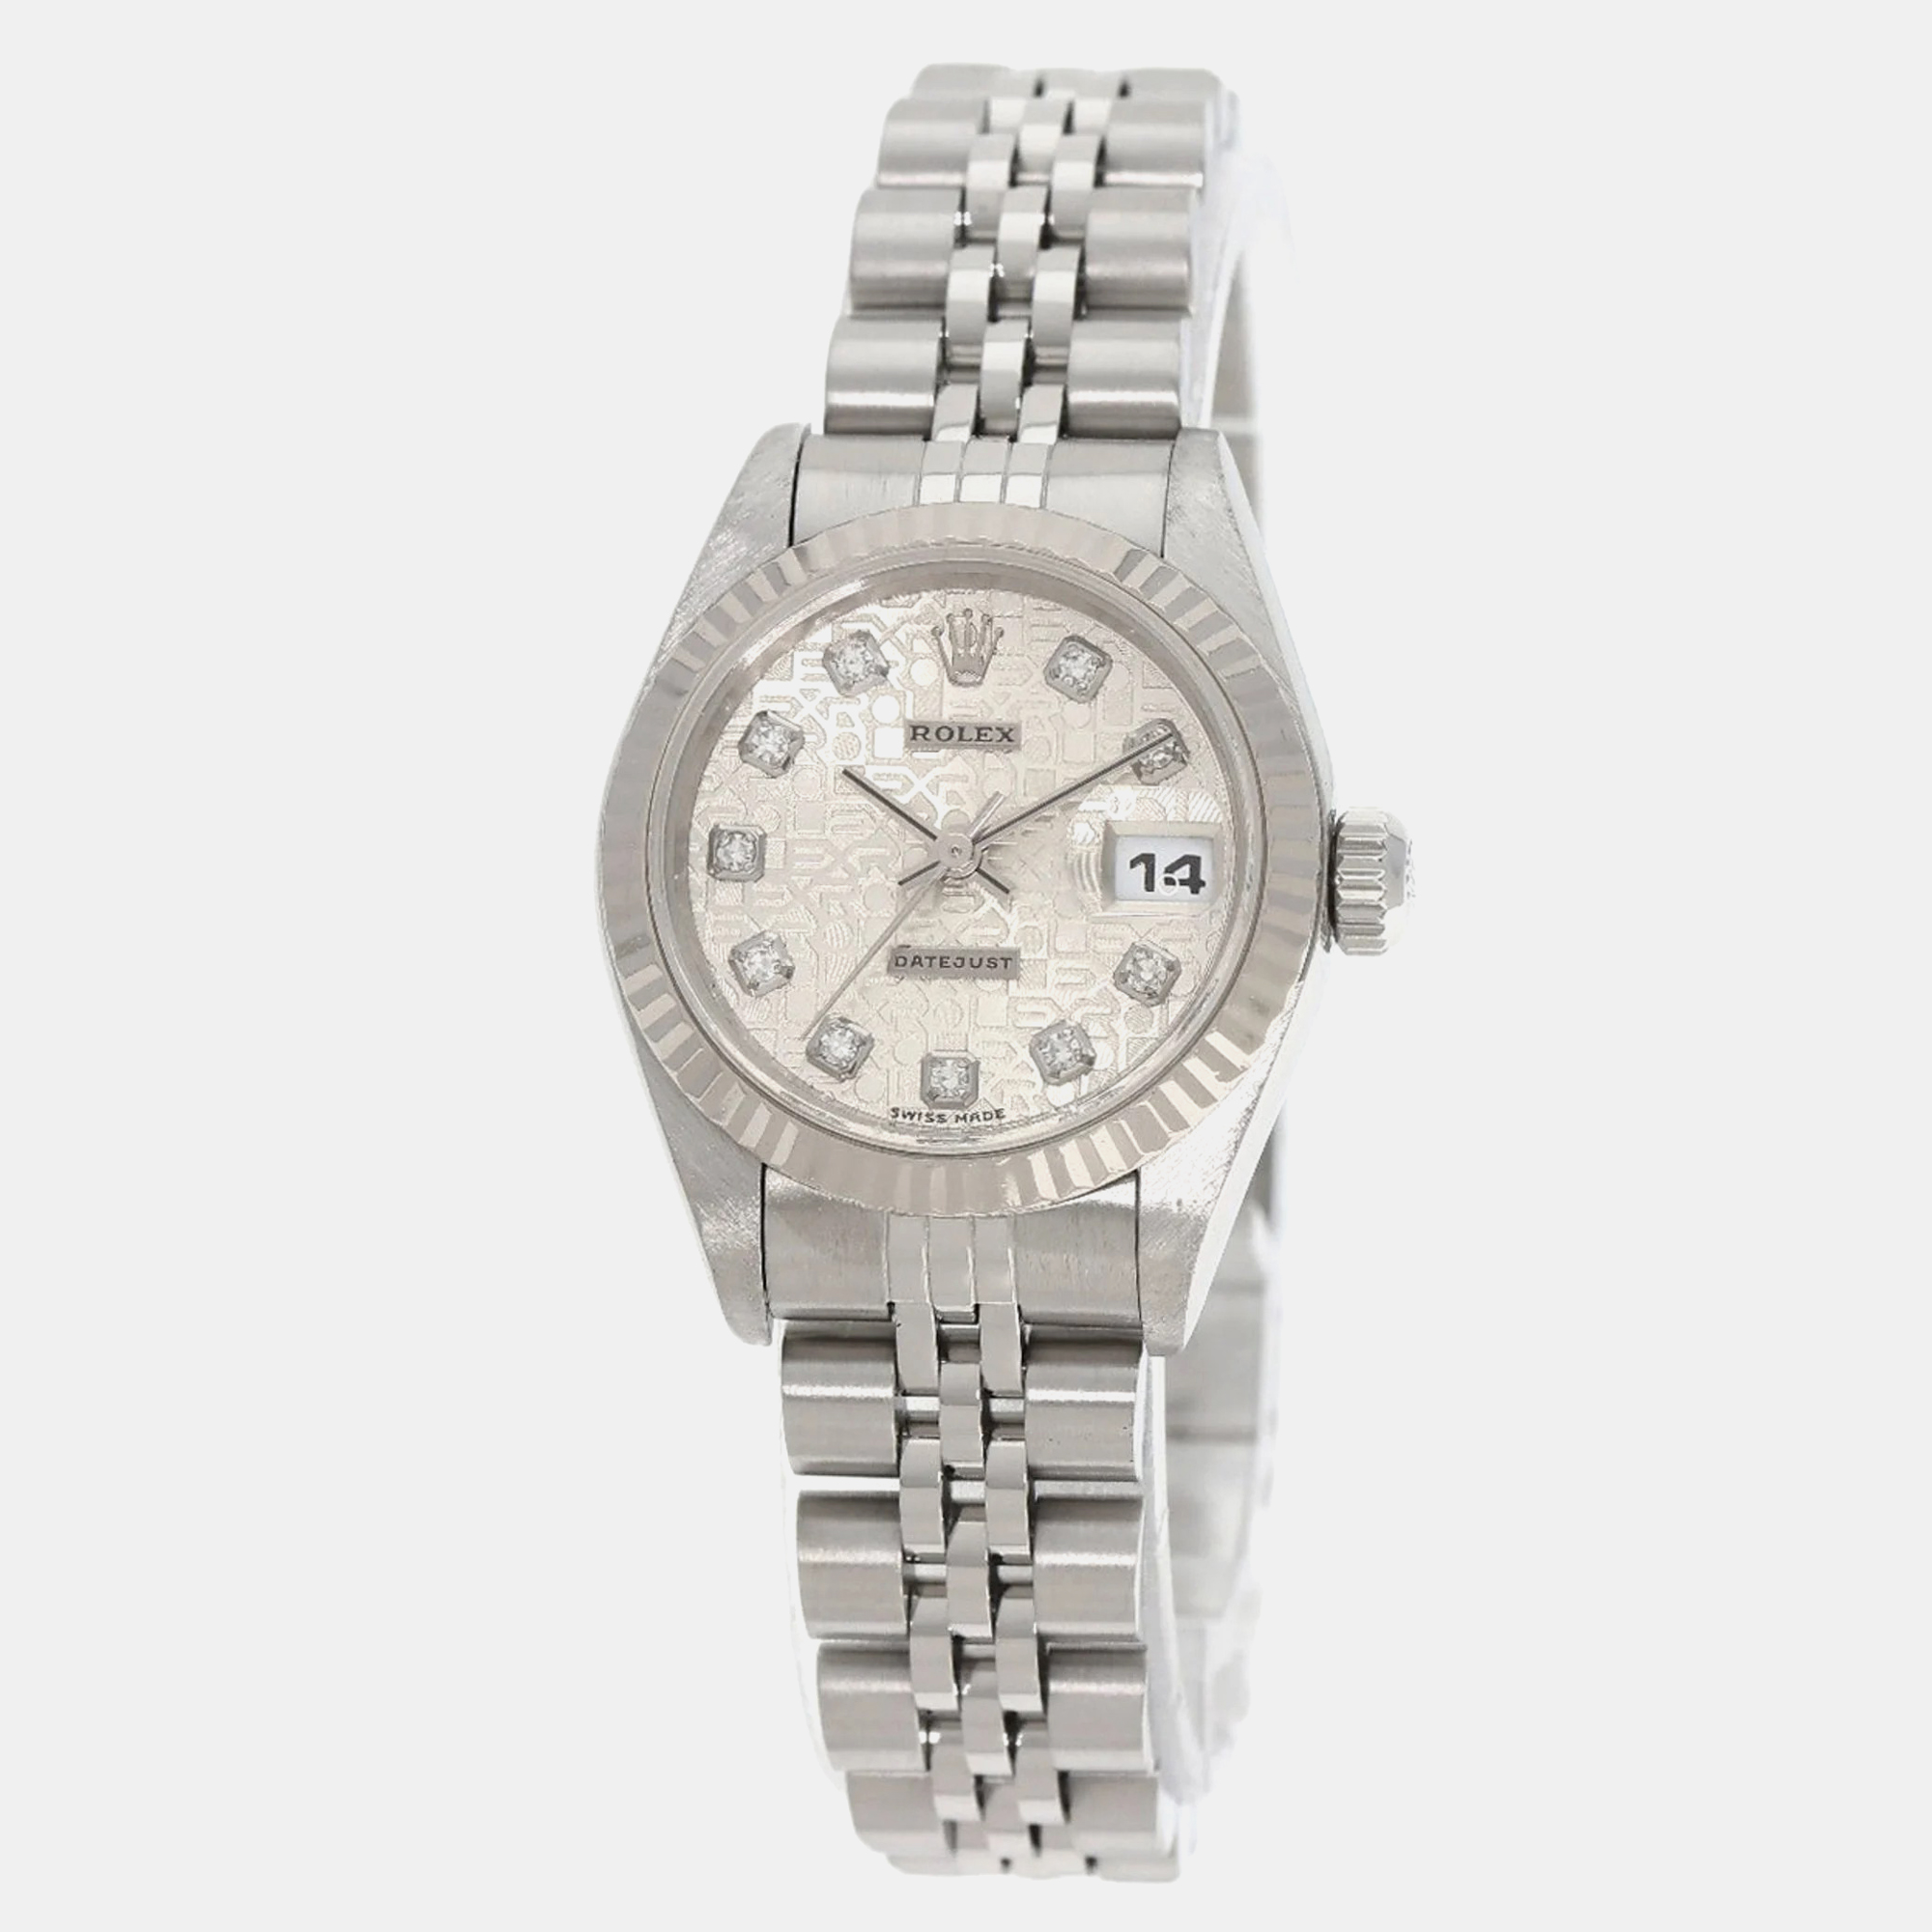 Rolex silver stainless steel datejust 79174 automatic women's wristwatch 26 mm